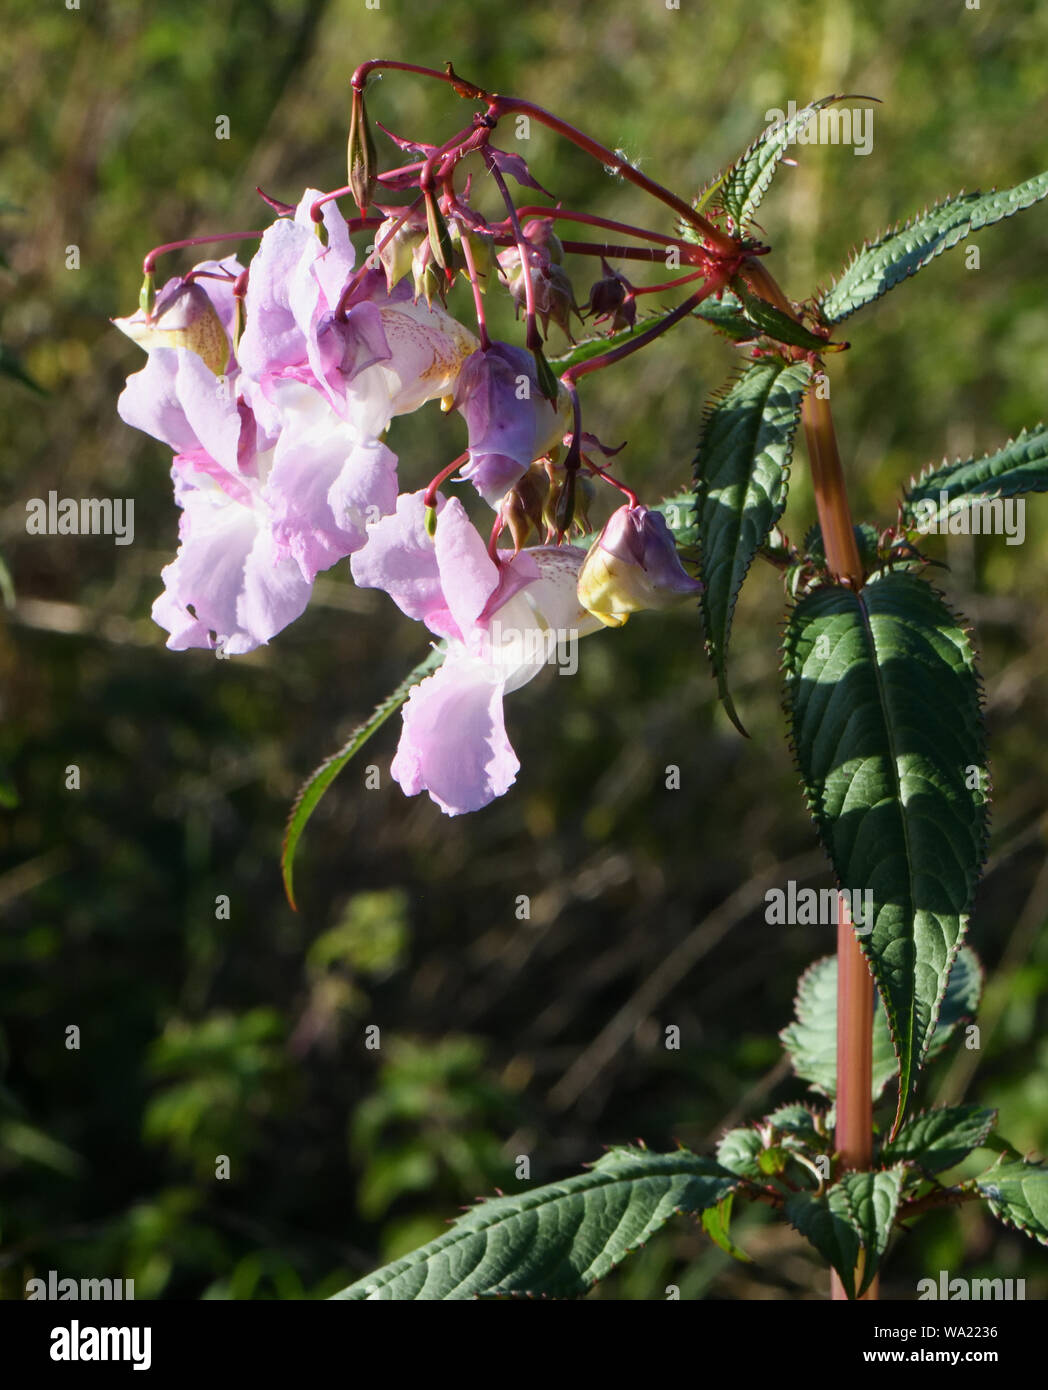 Flowers, buds and explosive seed pods of Himalayan Balsam (Impatiens glandulifera) growing amongst stinging nettles (Urtica dioica) in unusually dry s Stock Photo